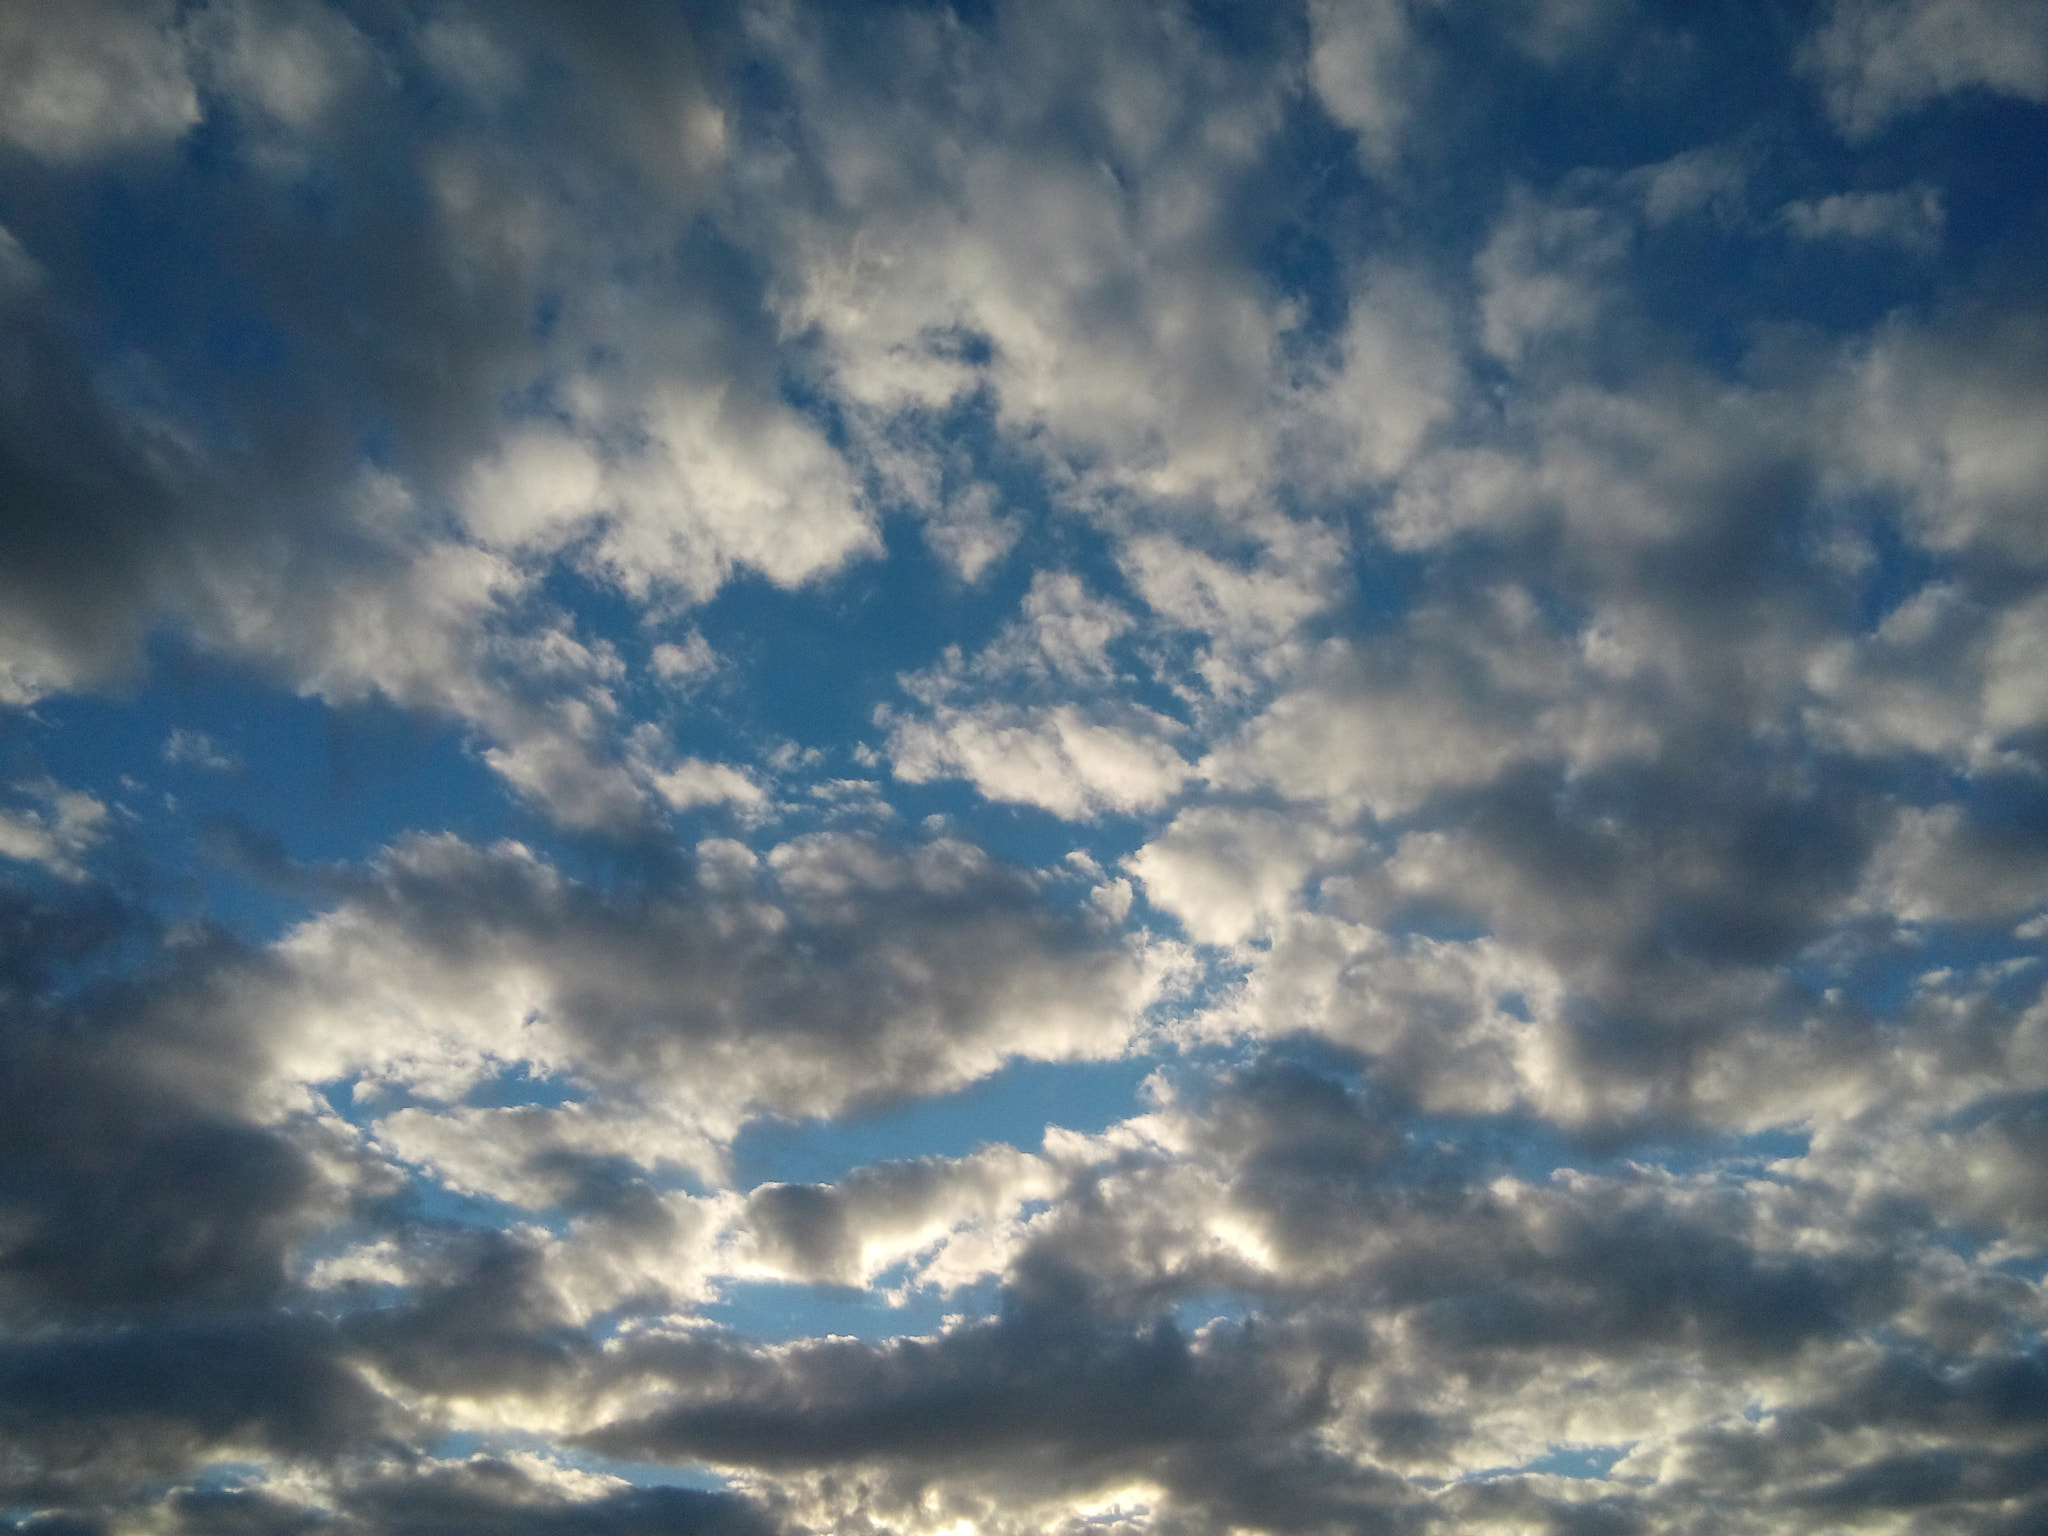 LG VOLT sample photo. Clouds photography